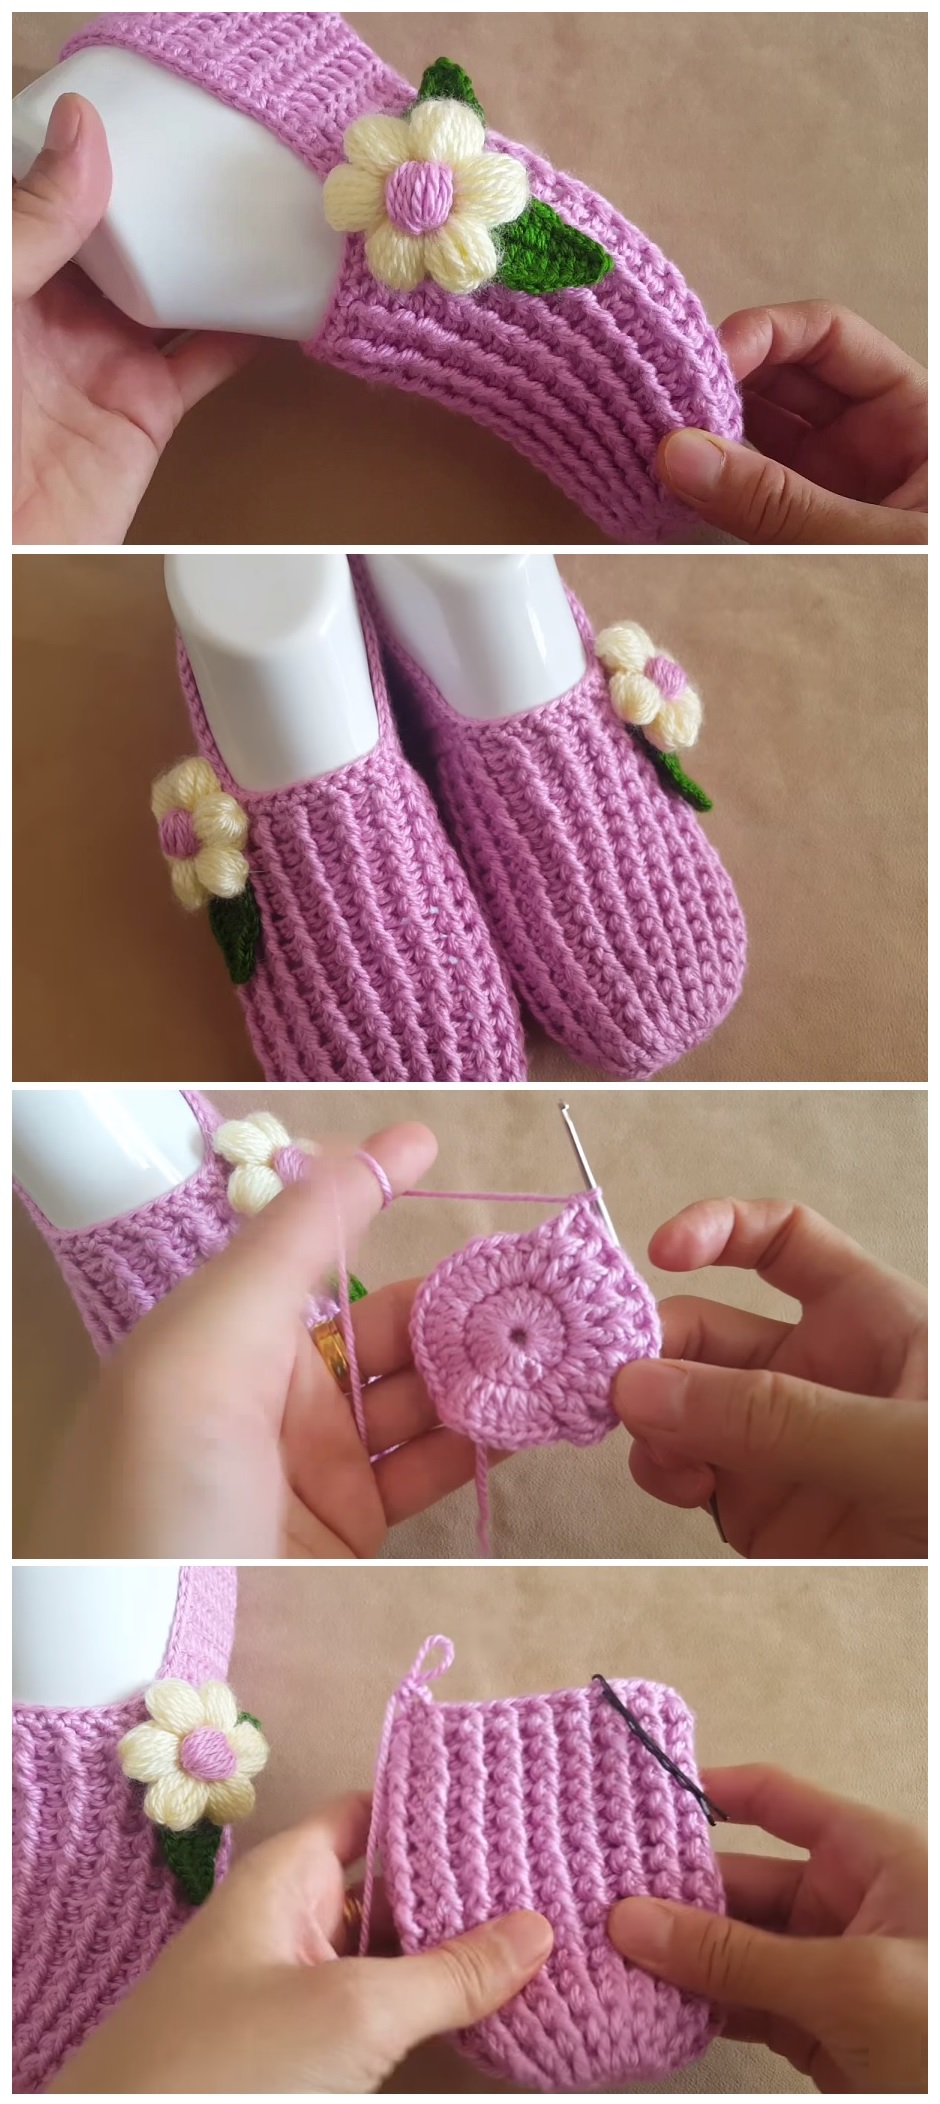 Crochet Tutorial – Beautiful Slippers with a Flower